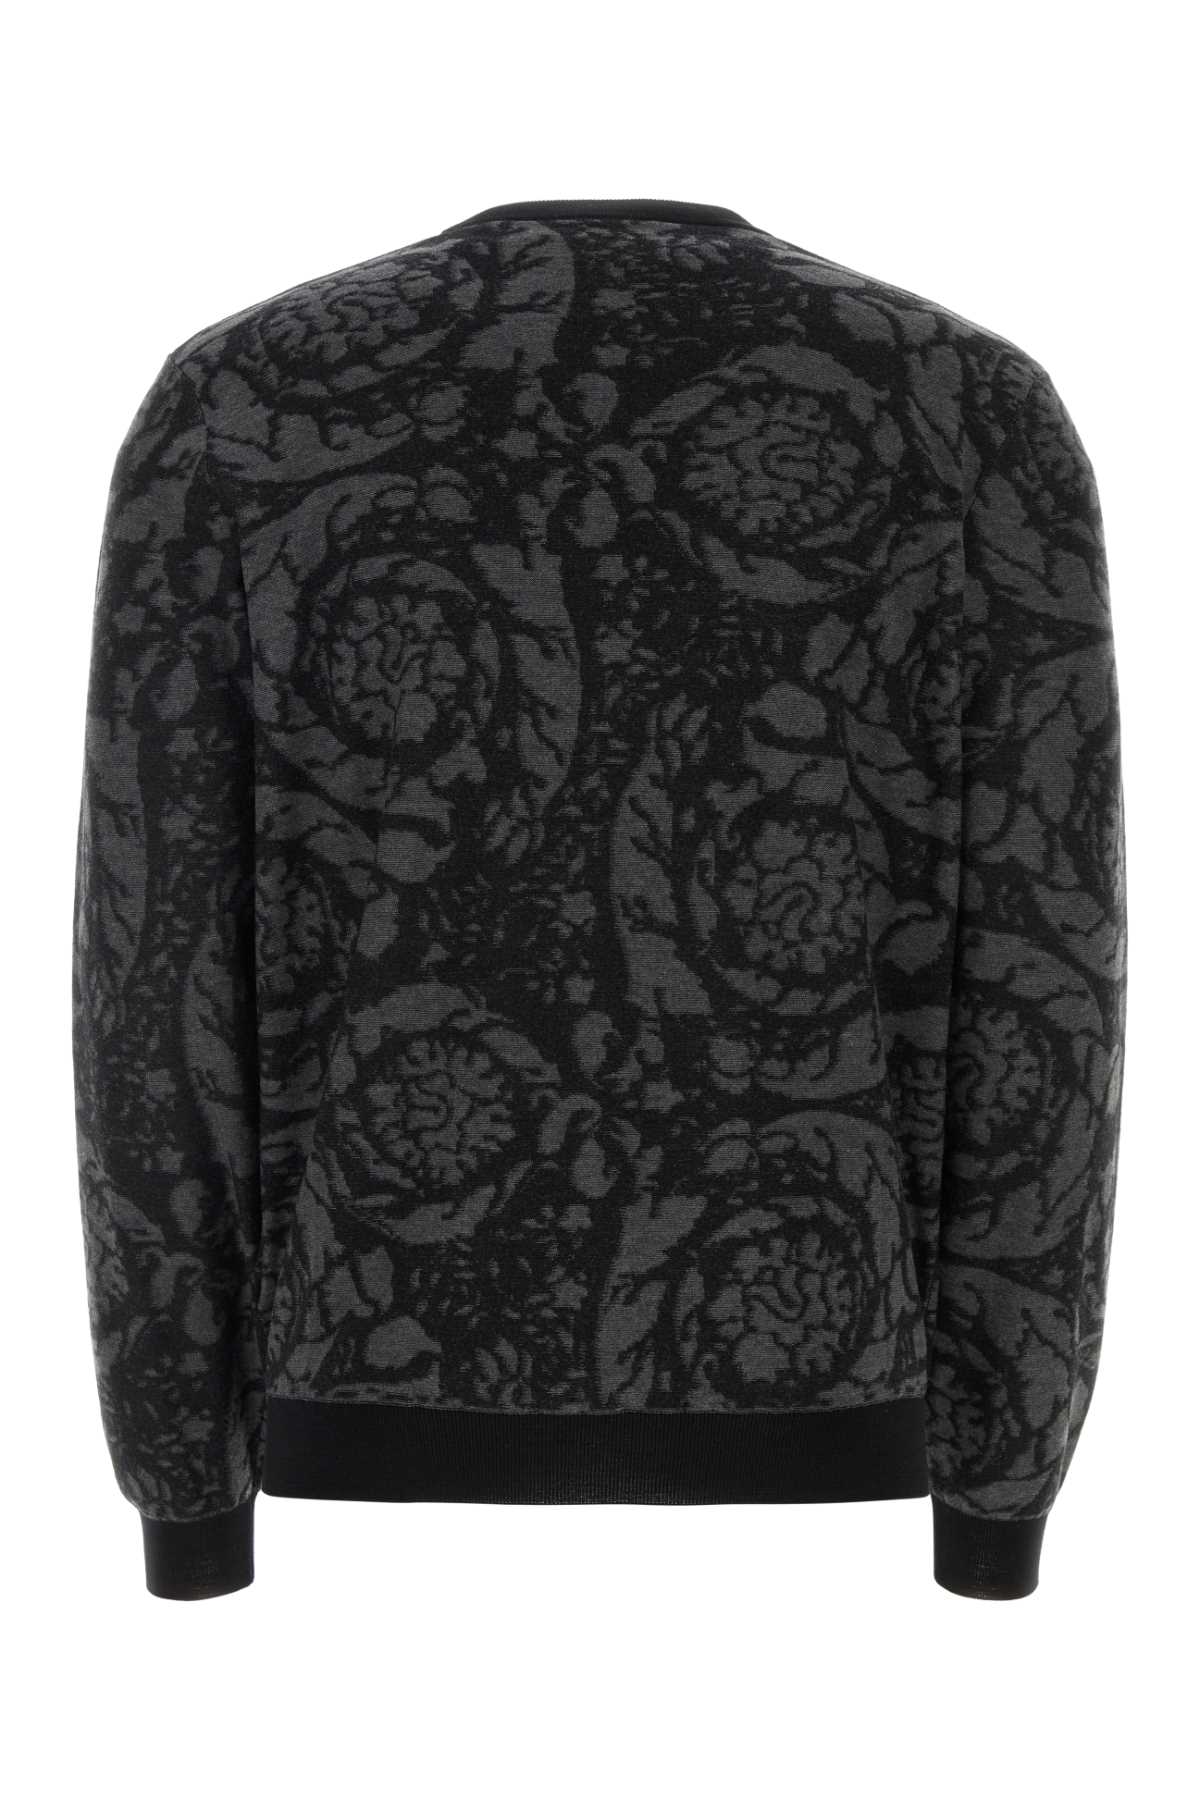 Versace Embroidered Wool Blend Jumper In Black